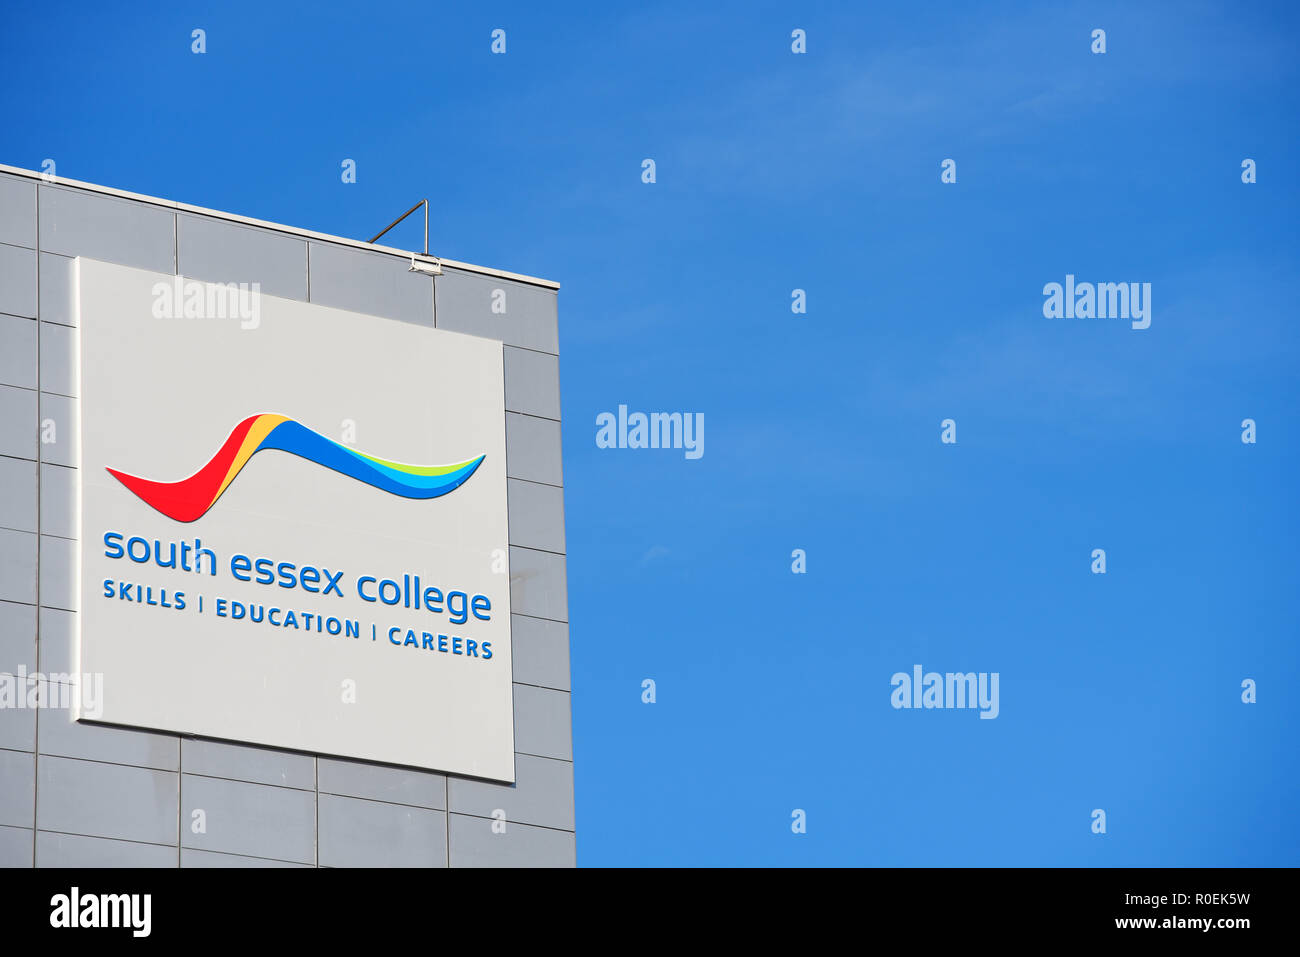 South Essex College, skills, education, careers sign. Southend on Sea, Essex, UK. Building. Education centre. Modern. Blue sky with space for copy Stock Photo